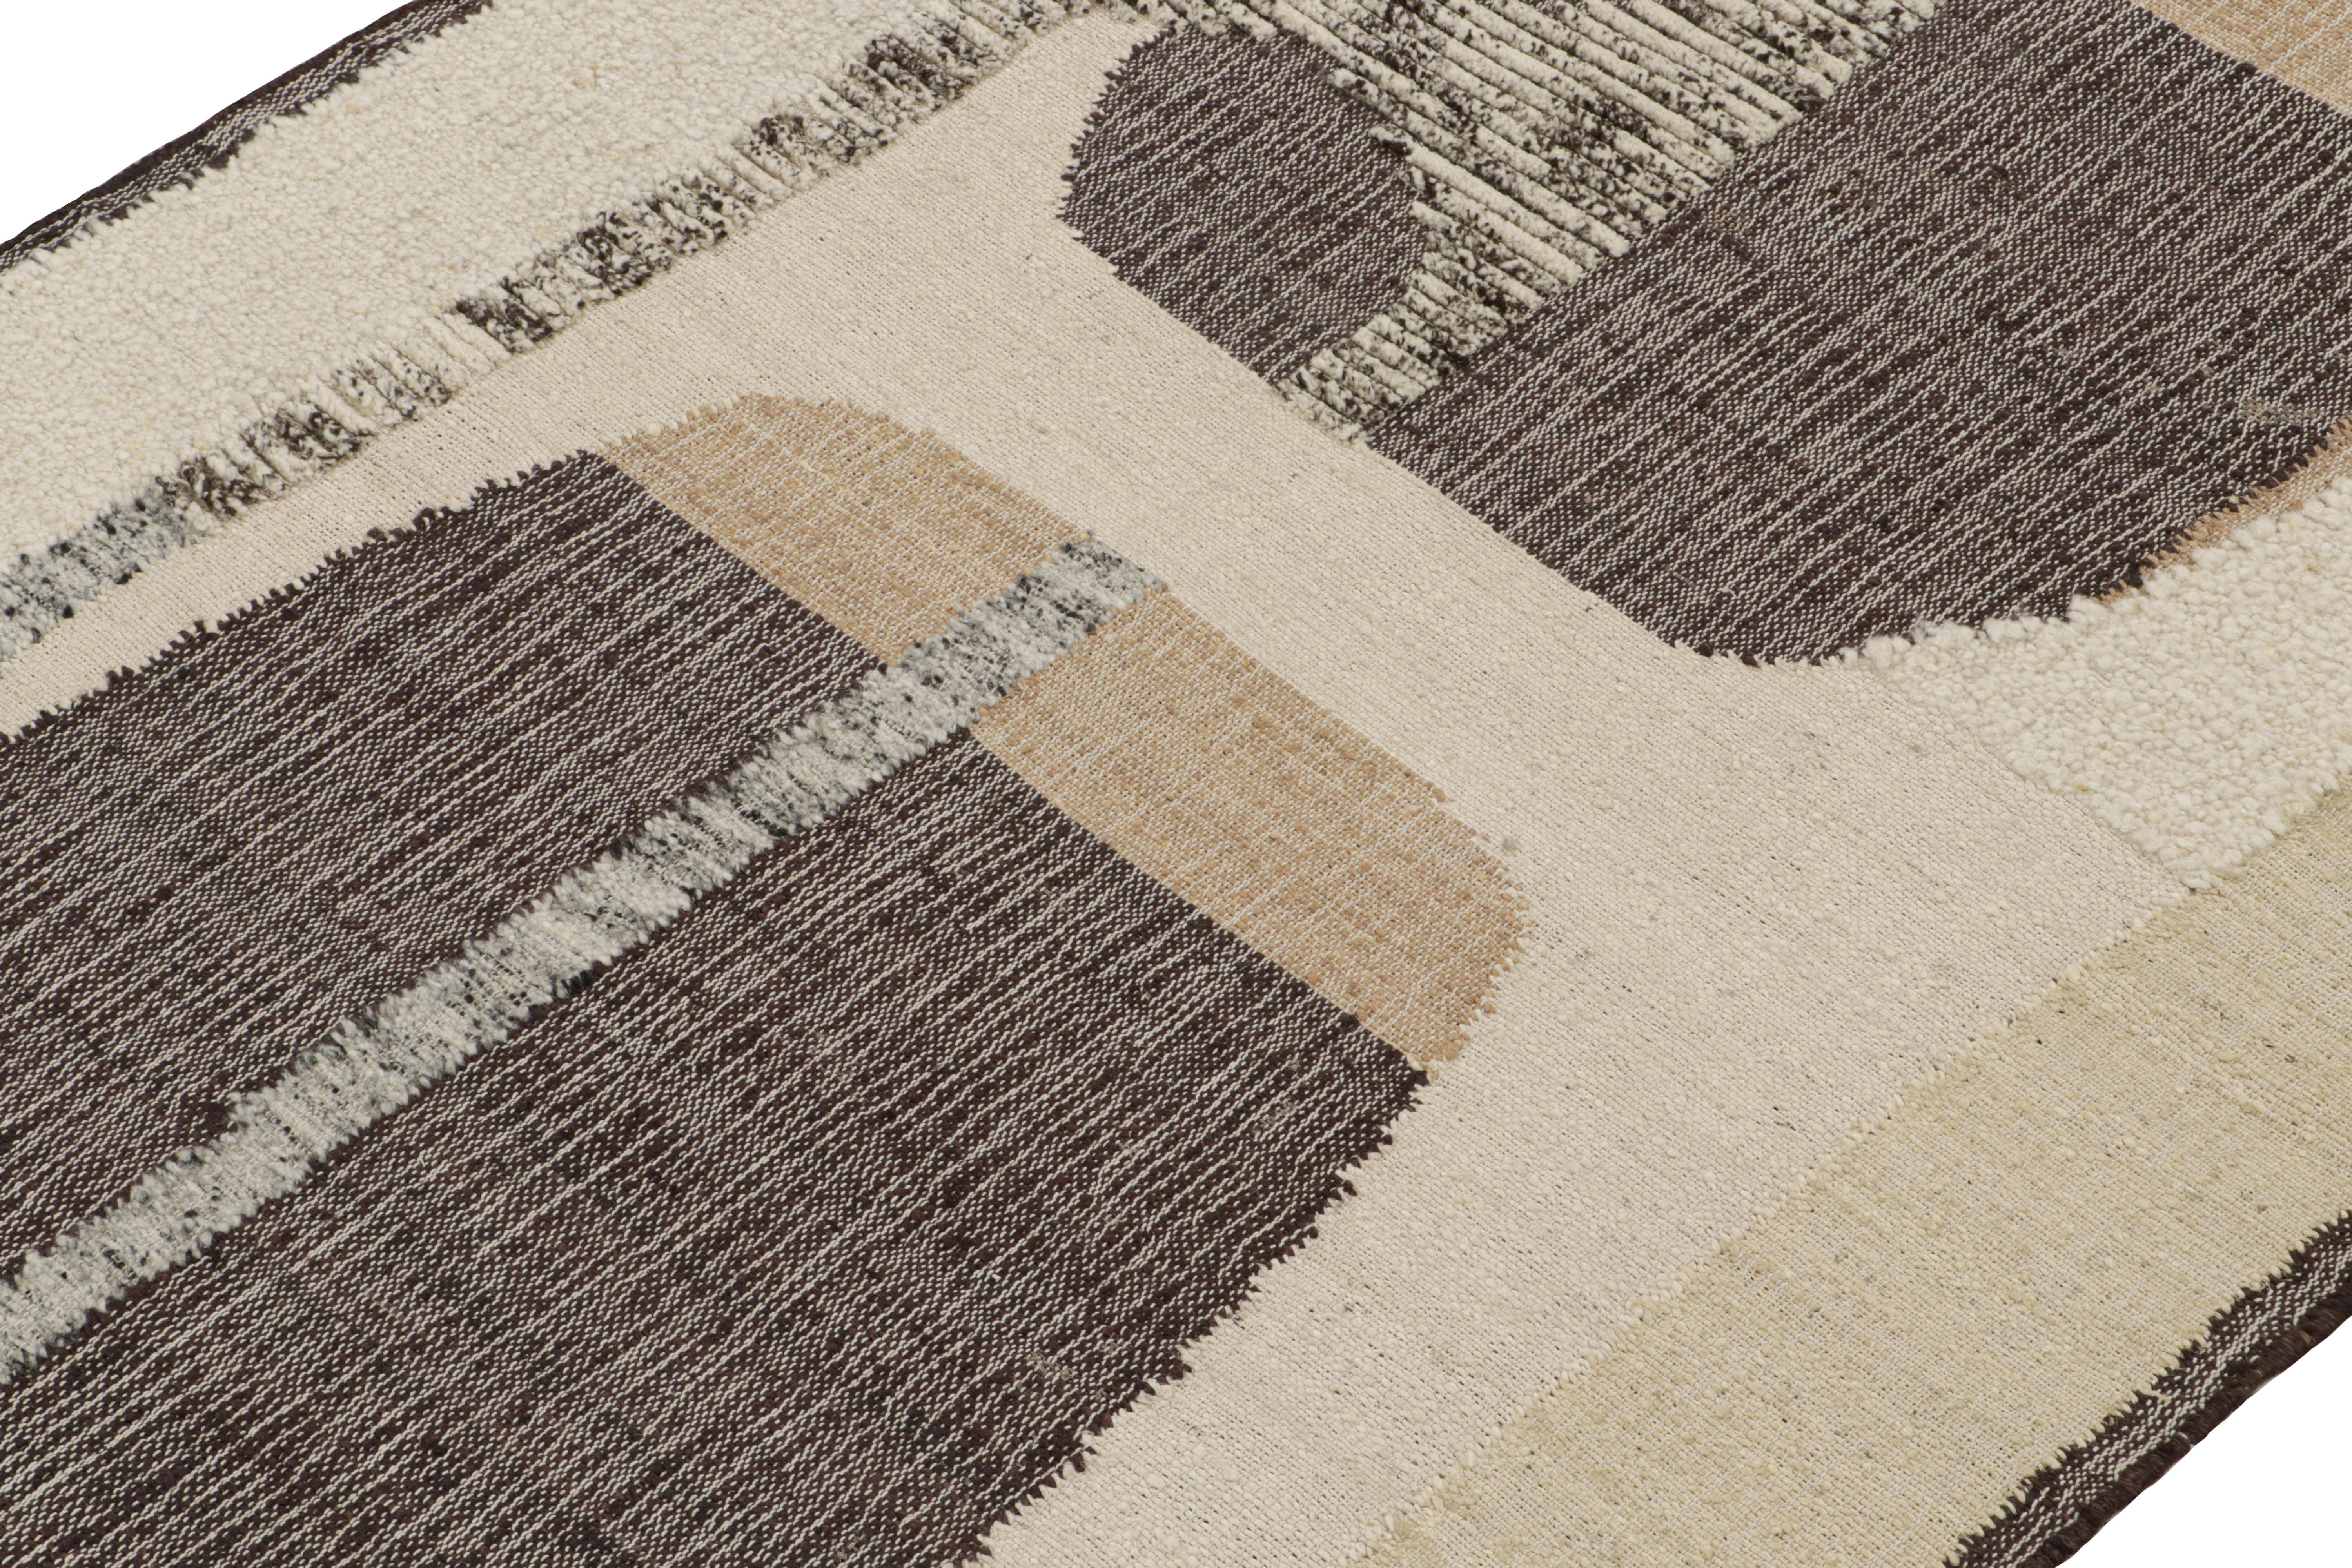 Indian Rug & Kilim’s Contemporary kilim rug in Brown, White & Black Abstract Pattern For Sale